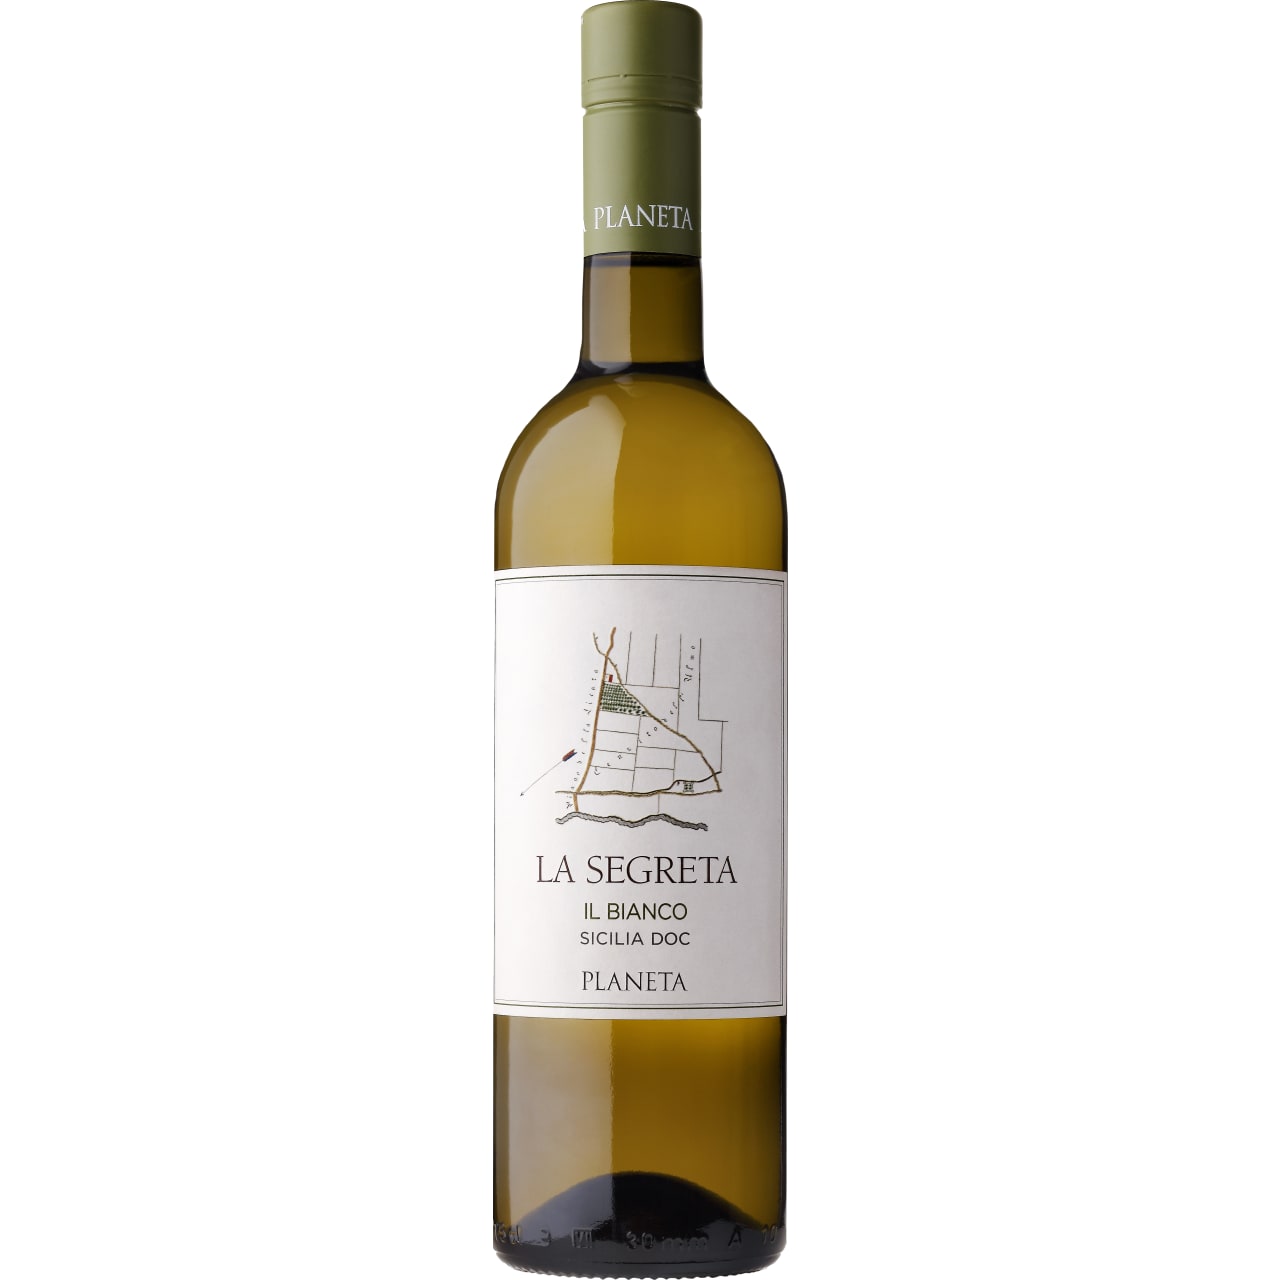 Full, dry and minerally with bags of exotic fruit generously bestowed by the Sicilian sun.